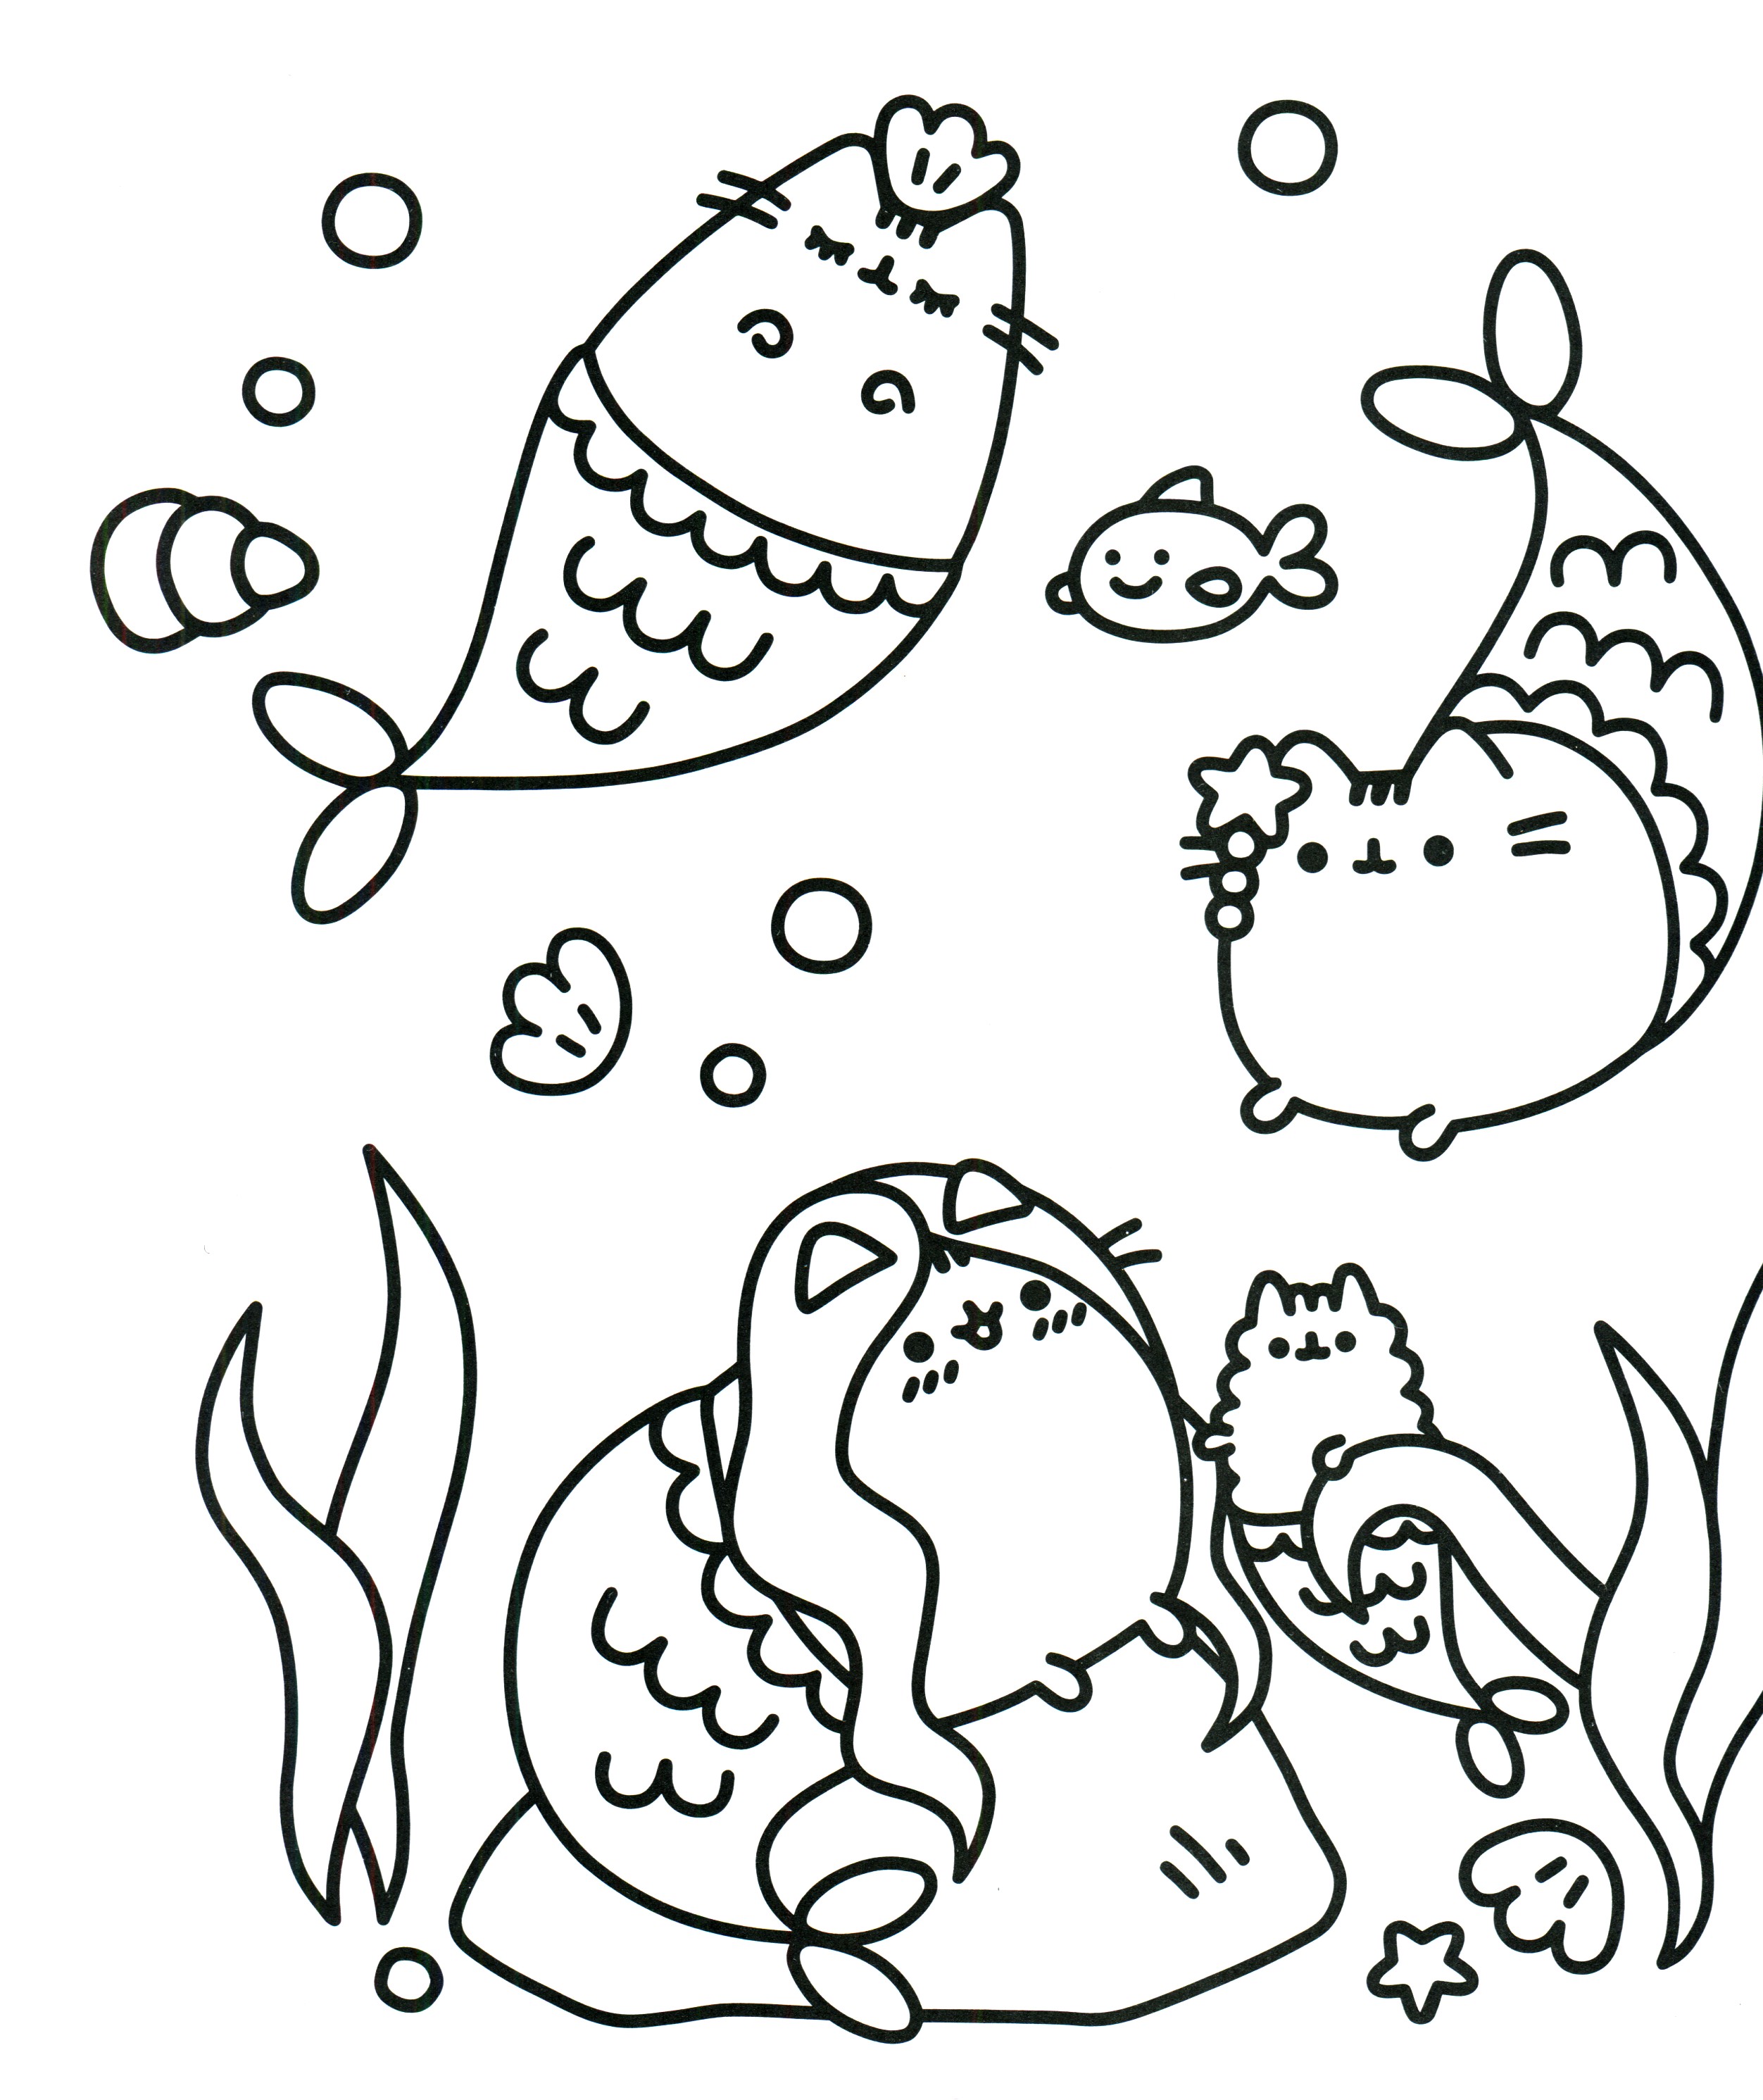 Pusheen The Mermaid Coloring Page - Free Printable Coloring Pages for Kids